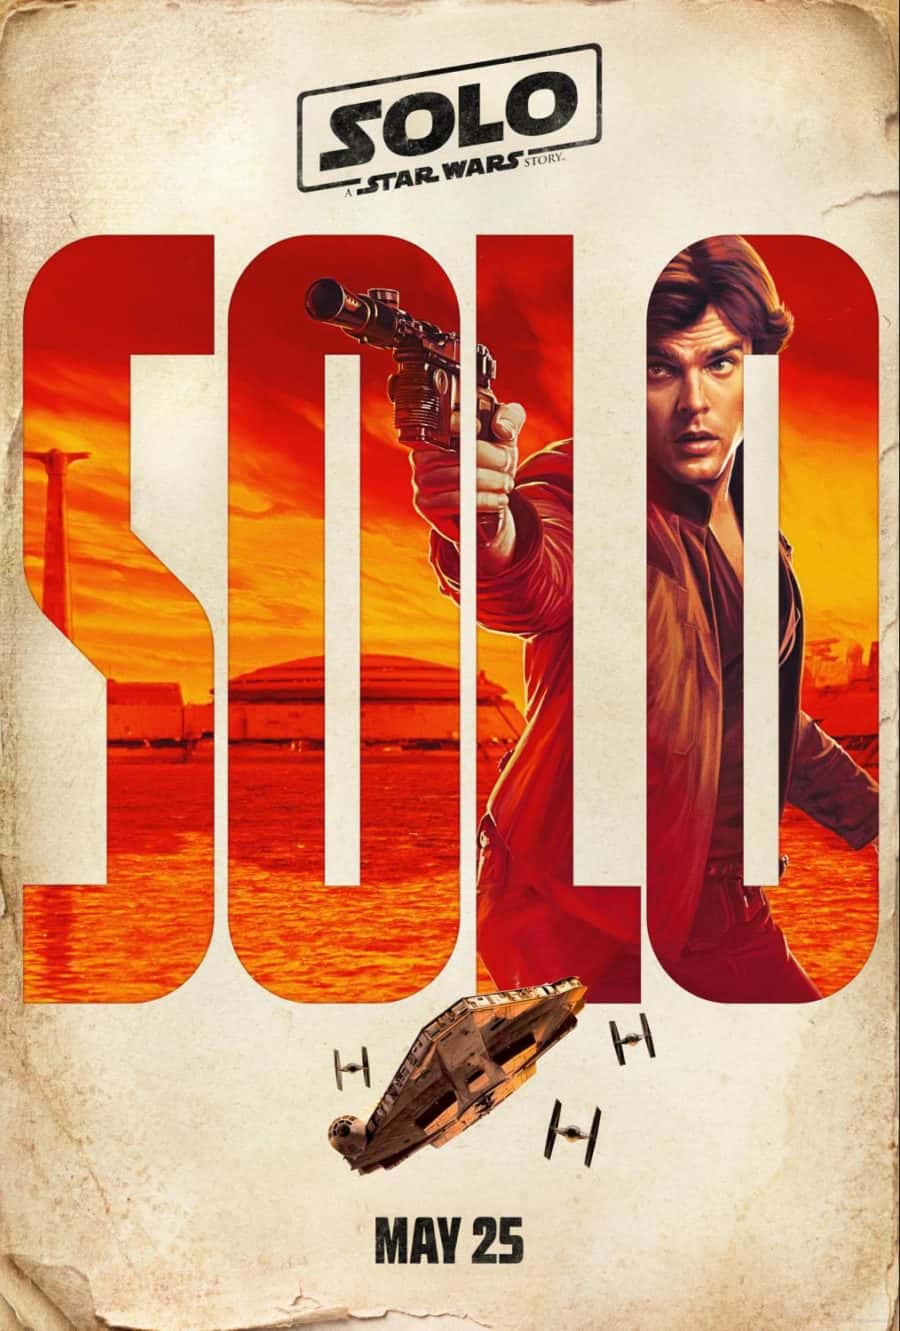 Solo - A Star Wars Story - Han Solo poster